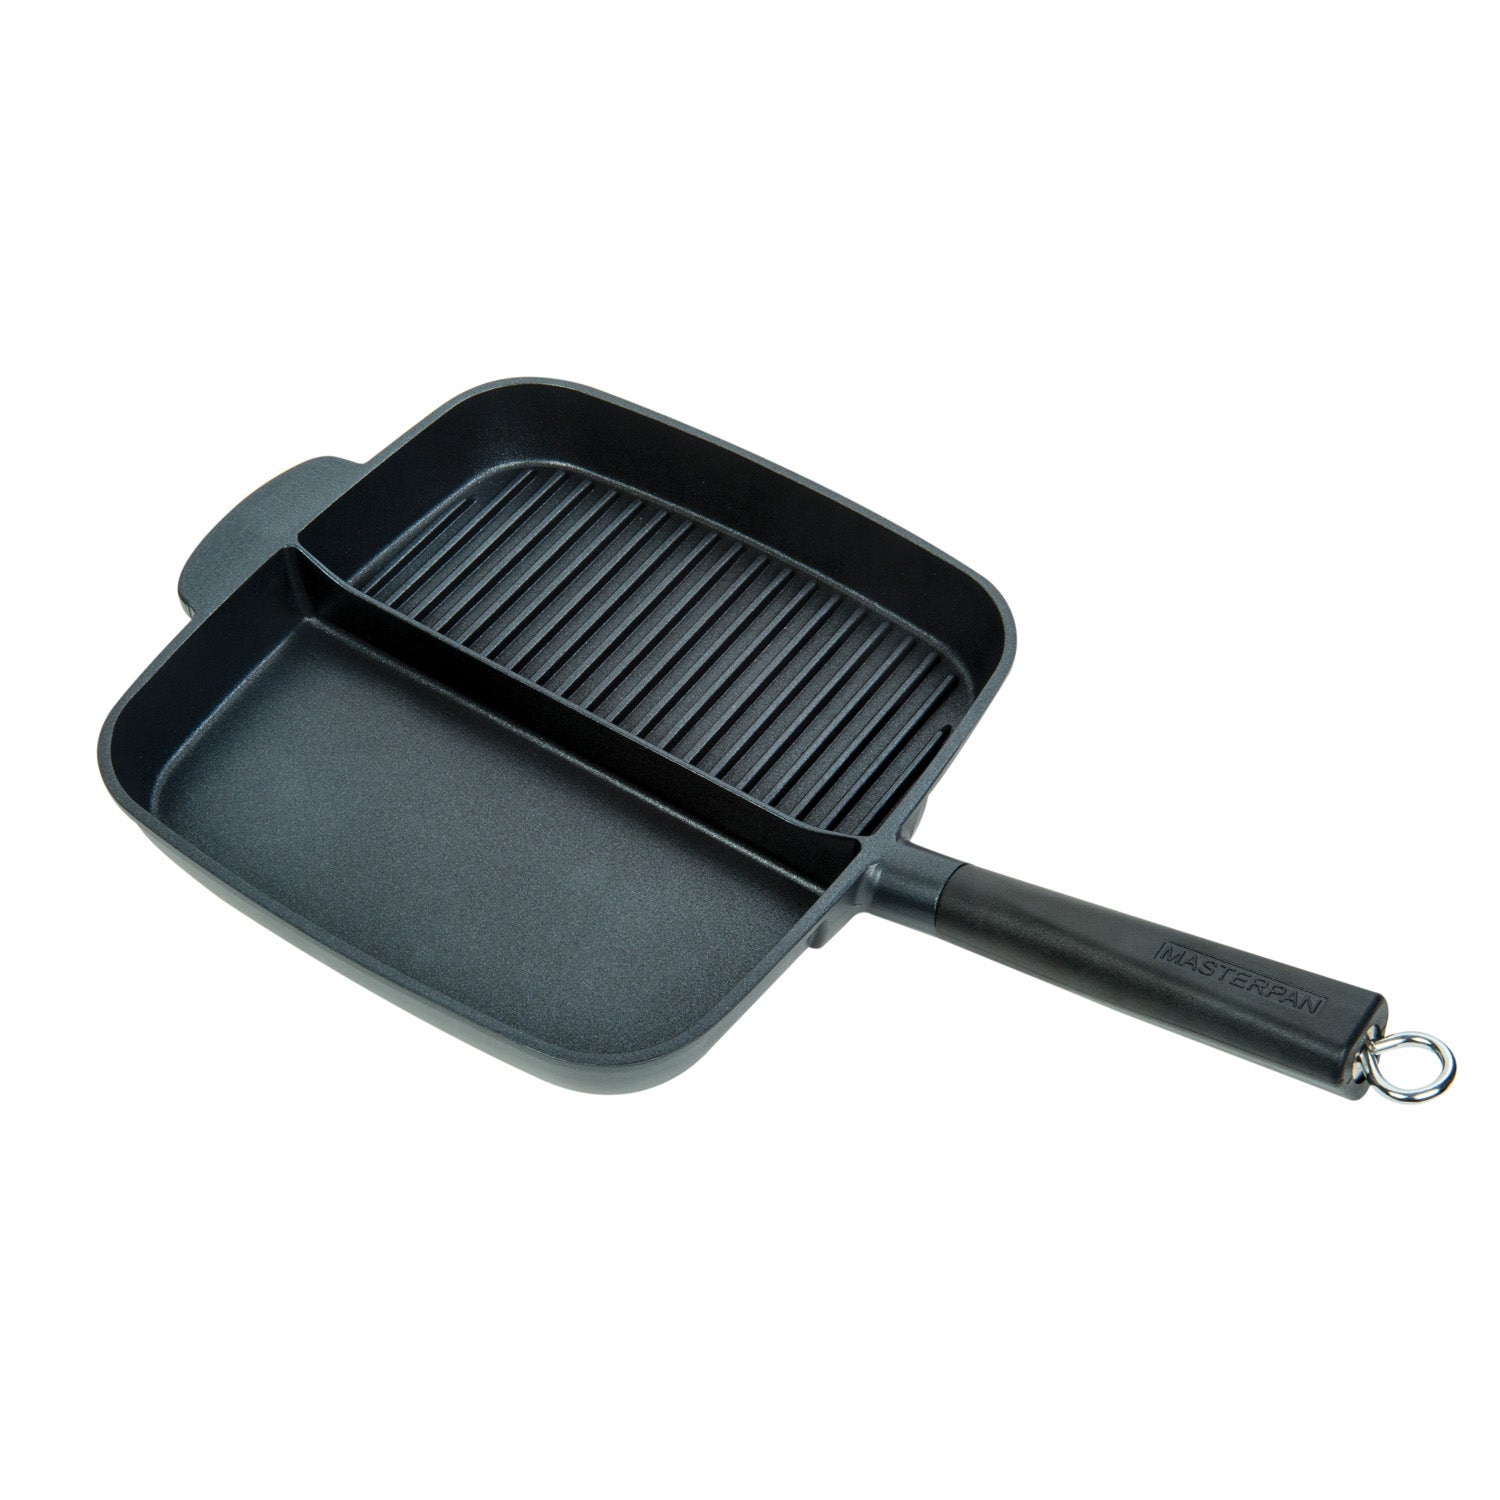 Aluminum Grill Griddle with Nonstick Coating